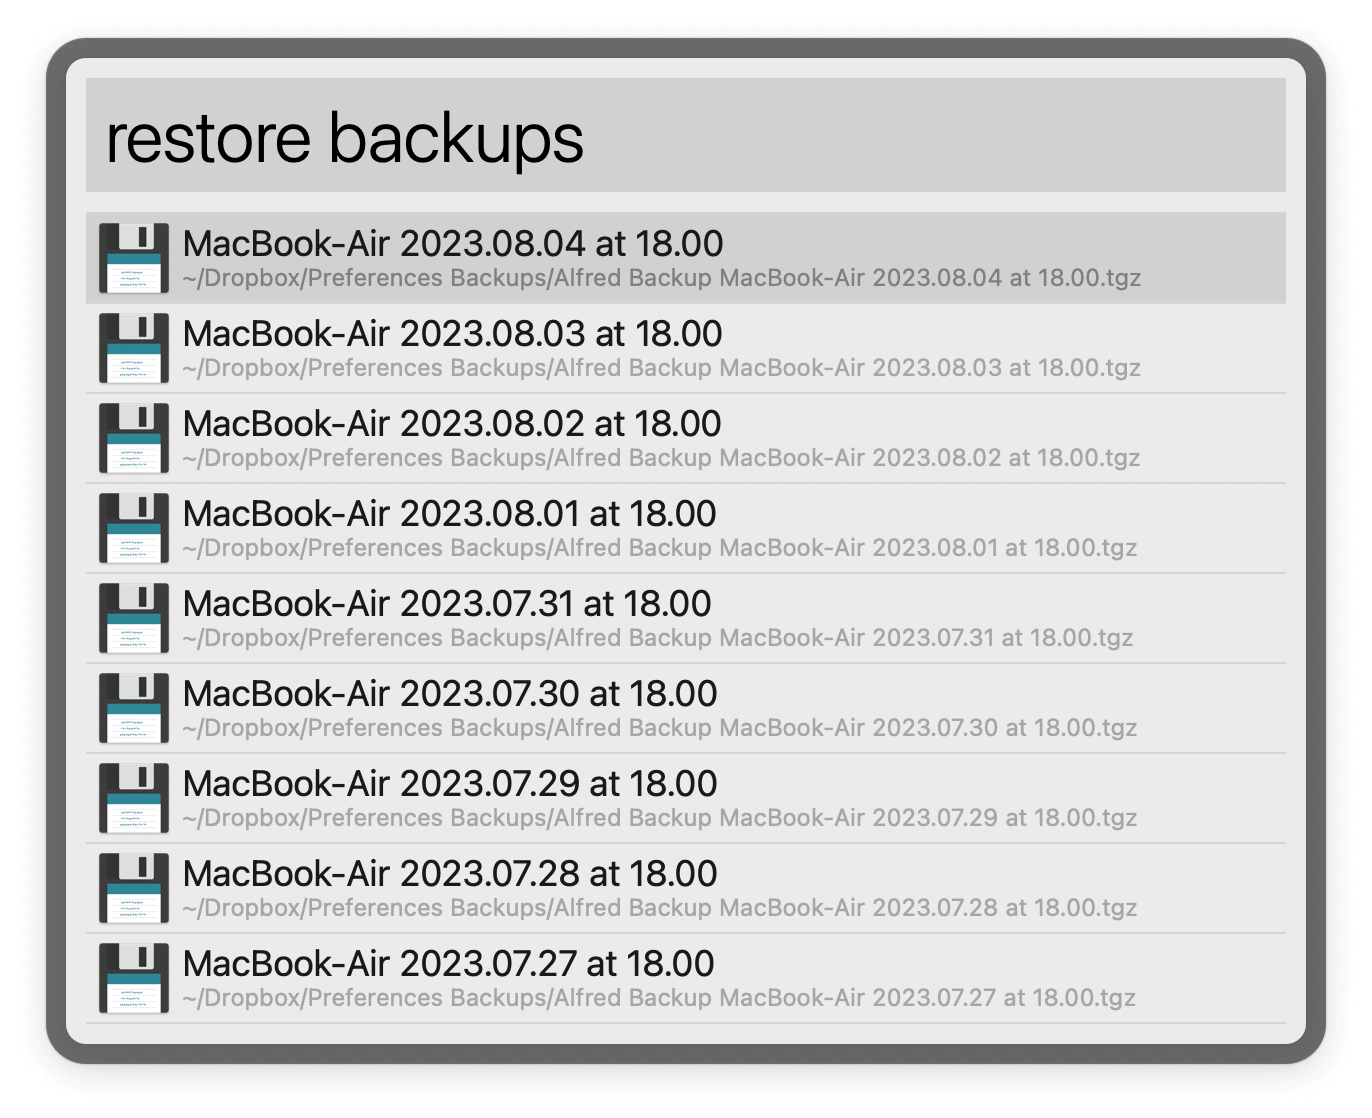 Listing backups to restore